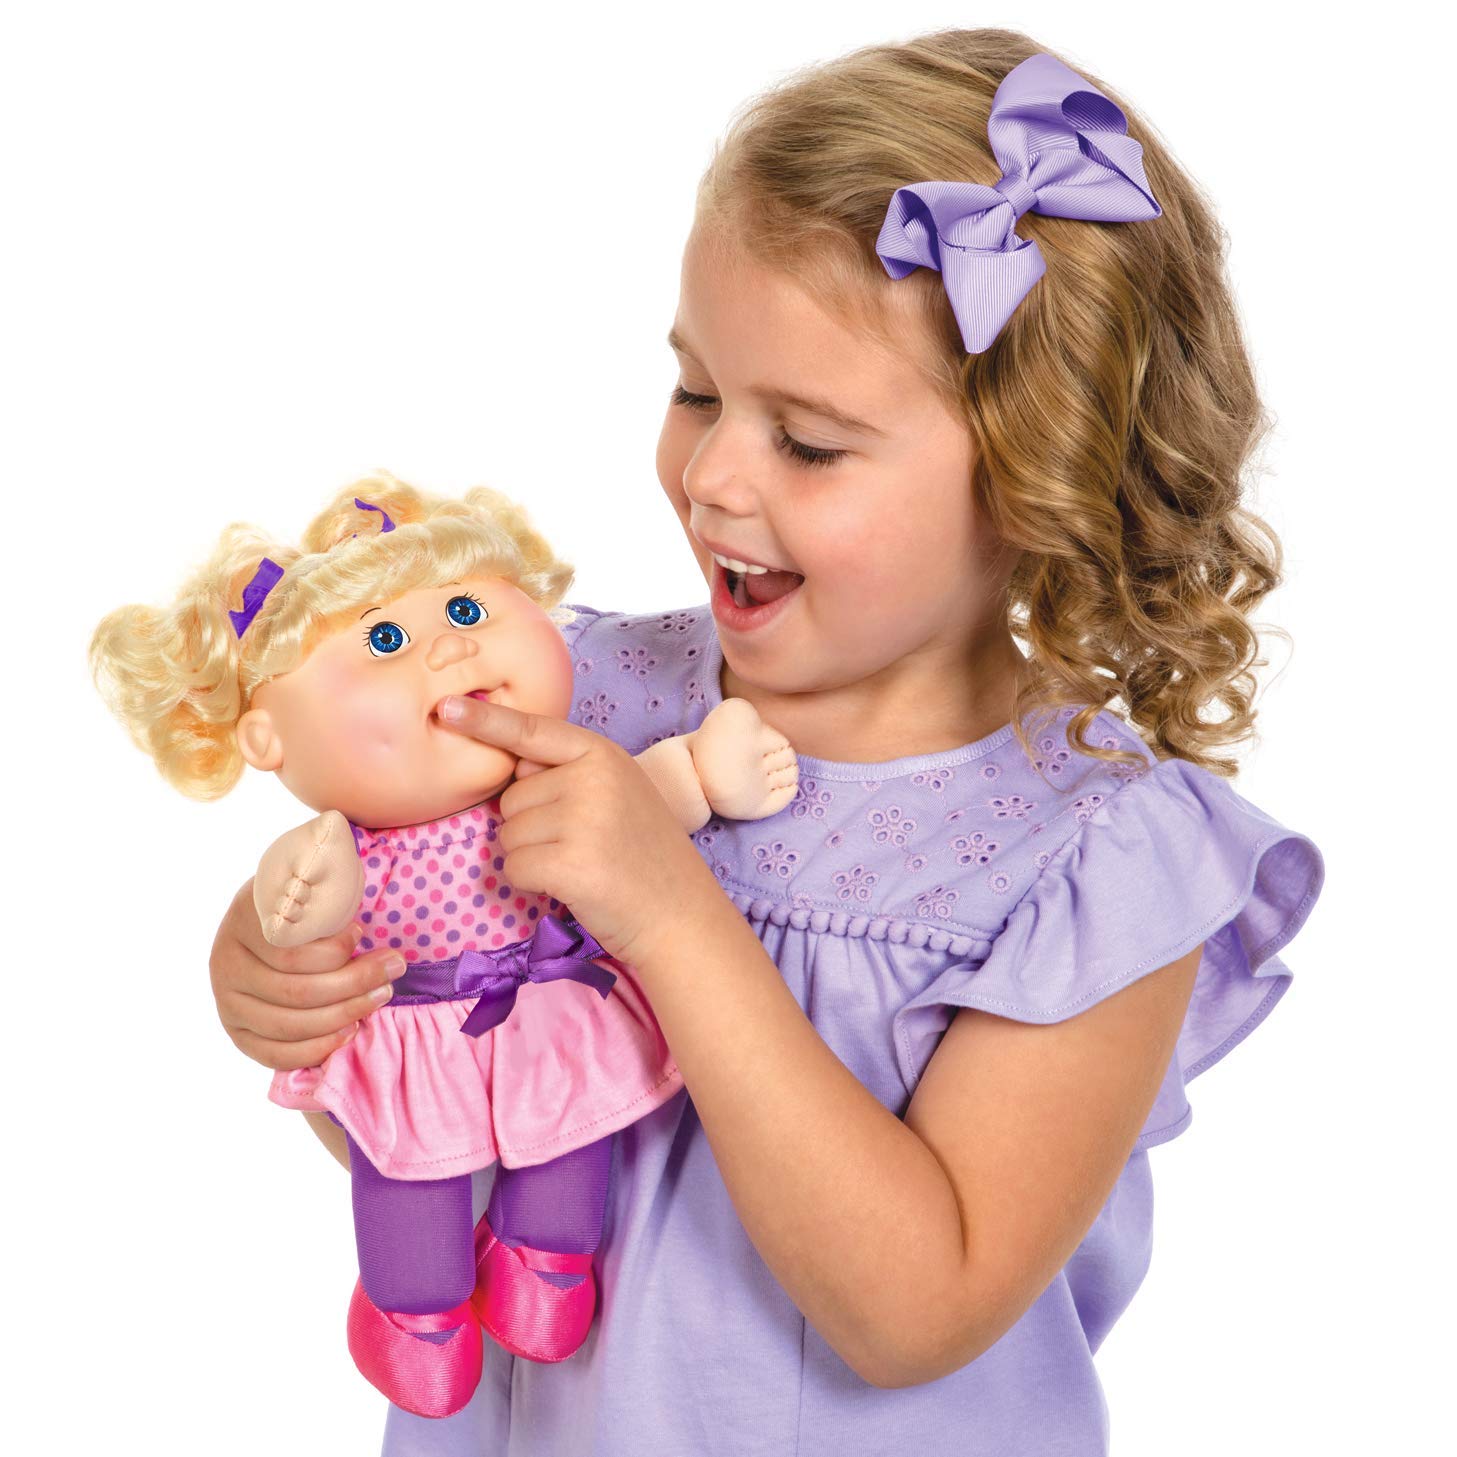 Cabbage Patch Kids Deluxe Babble ‘n Sing Toddler in Pink Fashion, 11” - Squeeze Hand, Giggles, 9 Sing-Along Songs - Classic 1998 CPK Dolls!